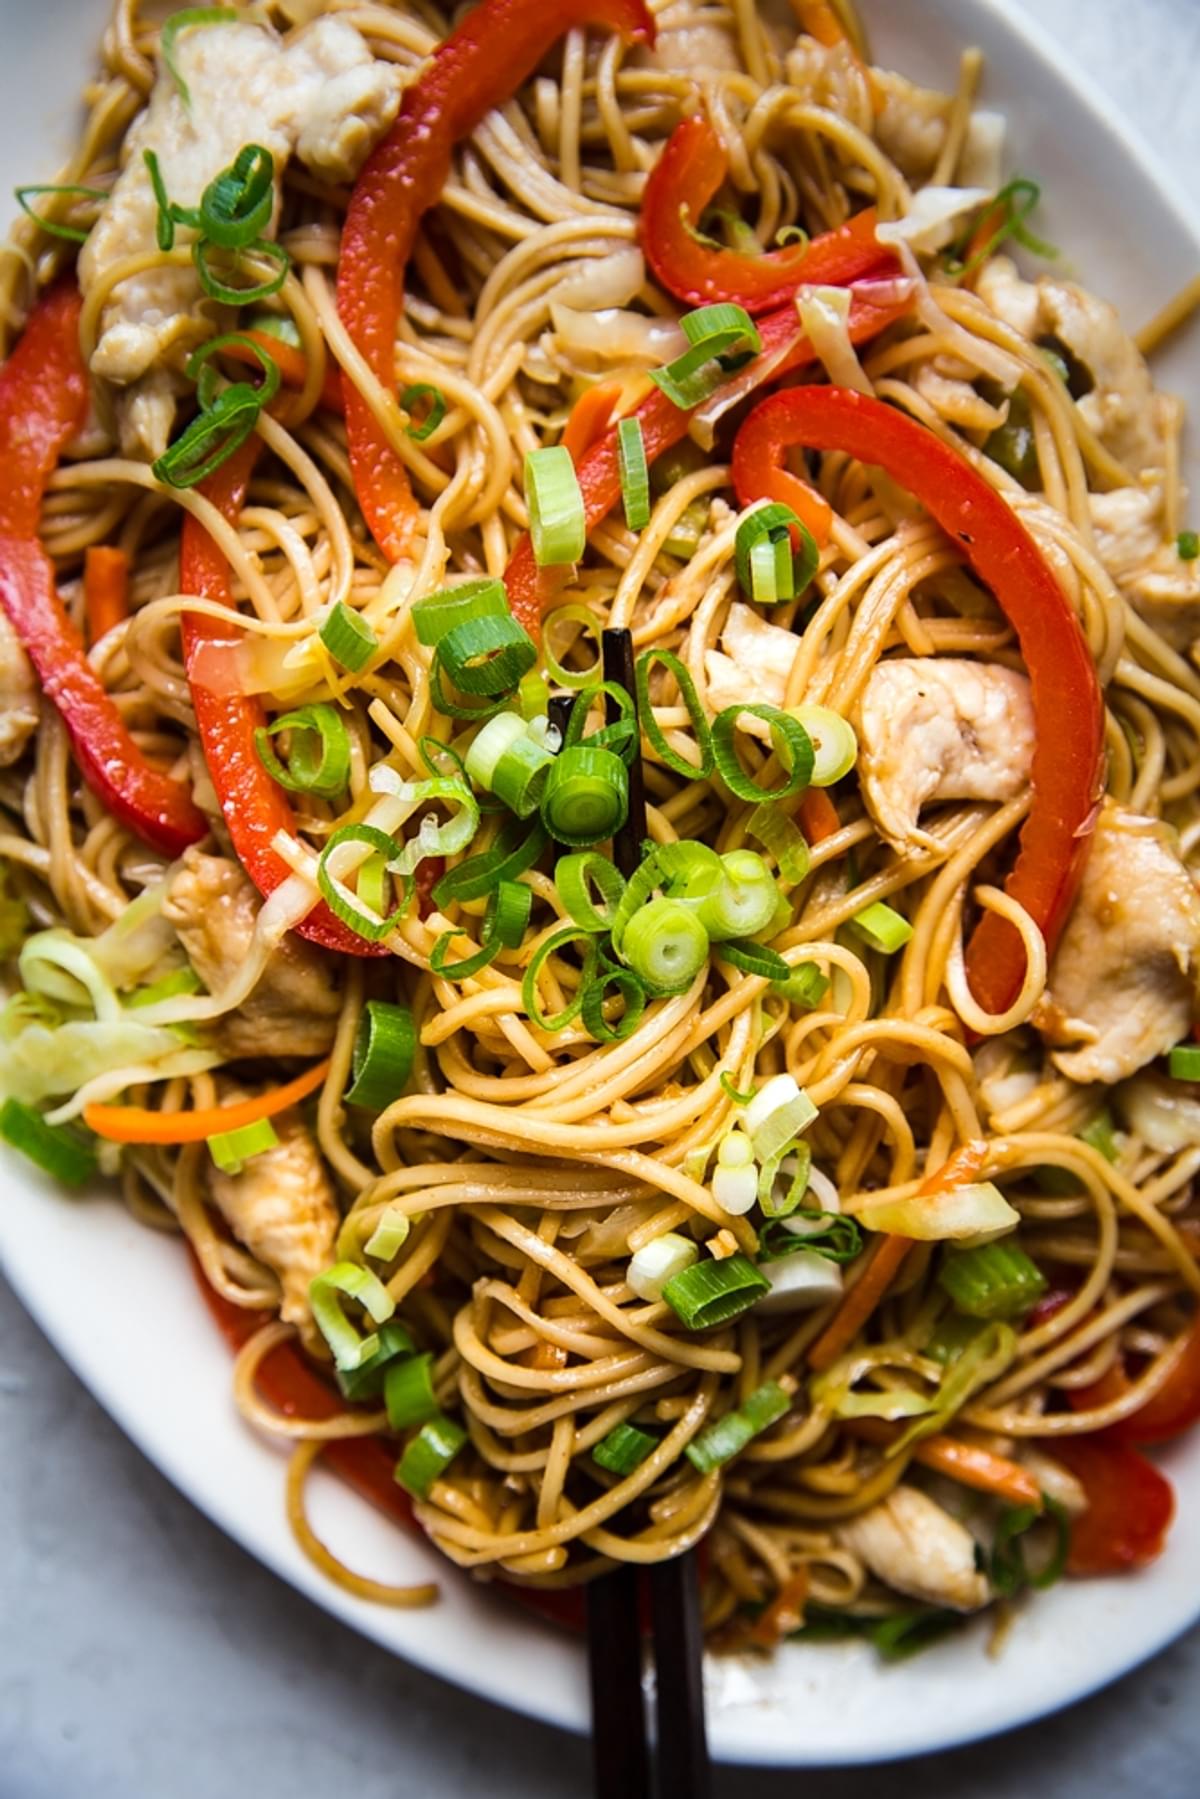 homemade chicken chow mein with bell peppers, celery, carrots on a serving plate